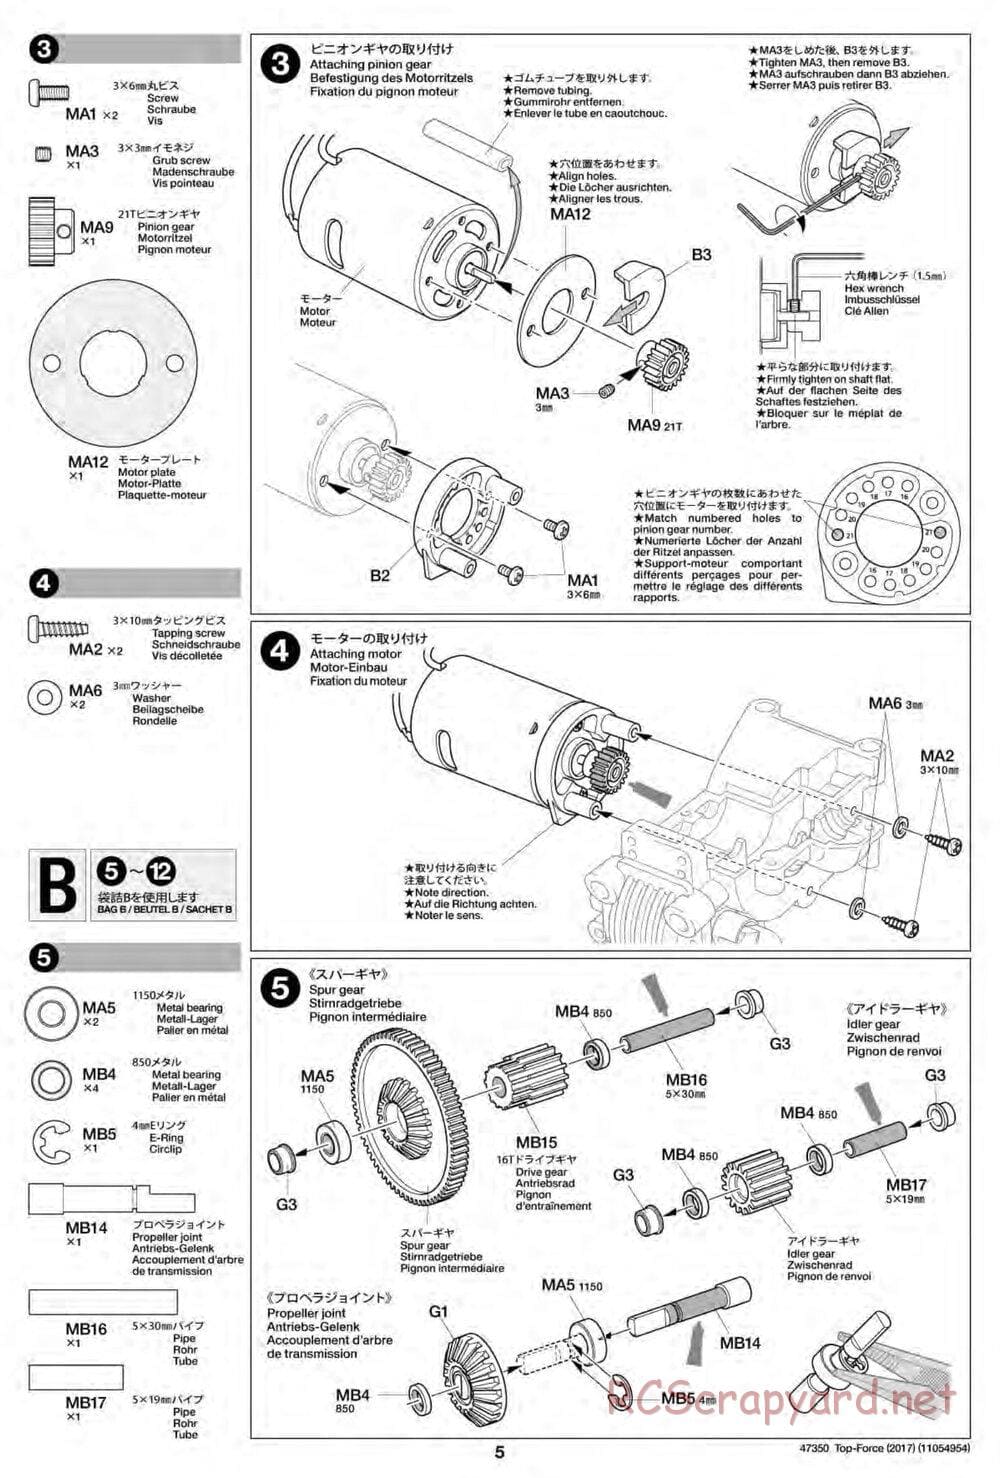 Tamiya - Top Force 2017 - DF-01 Chassis - Manual - Page 5